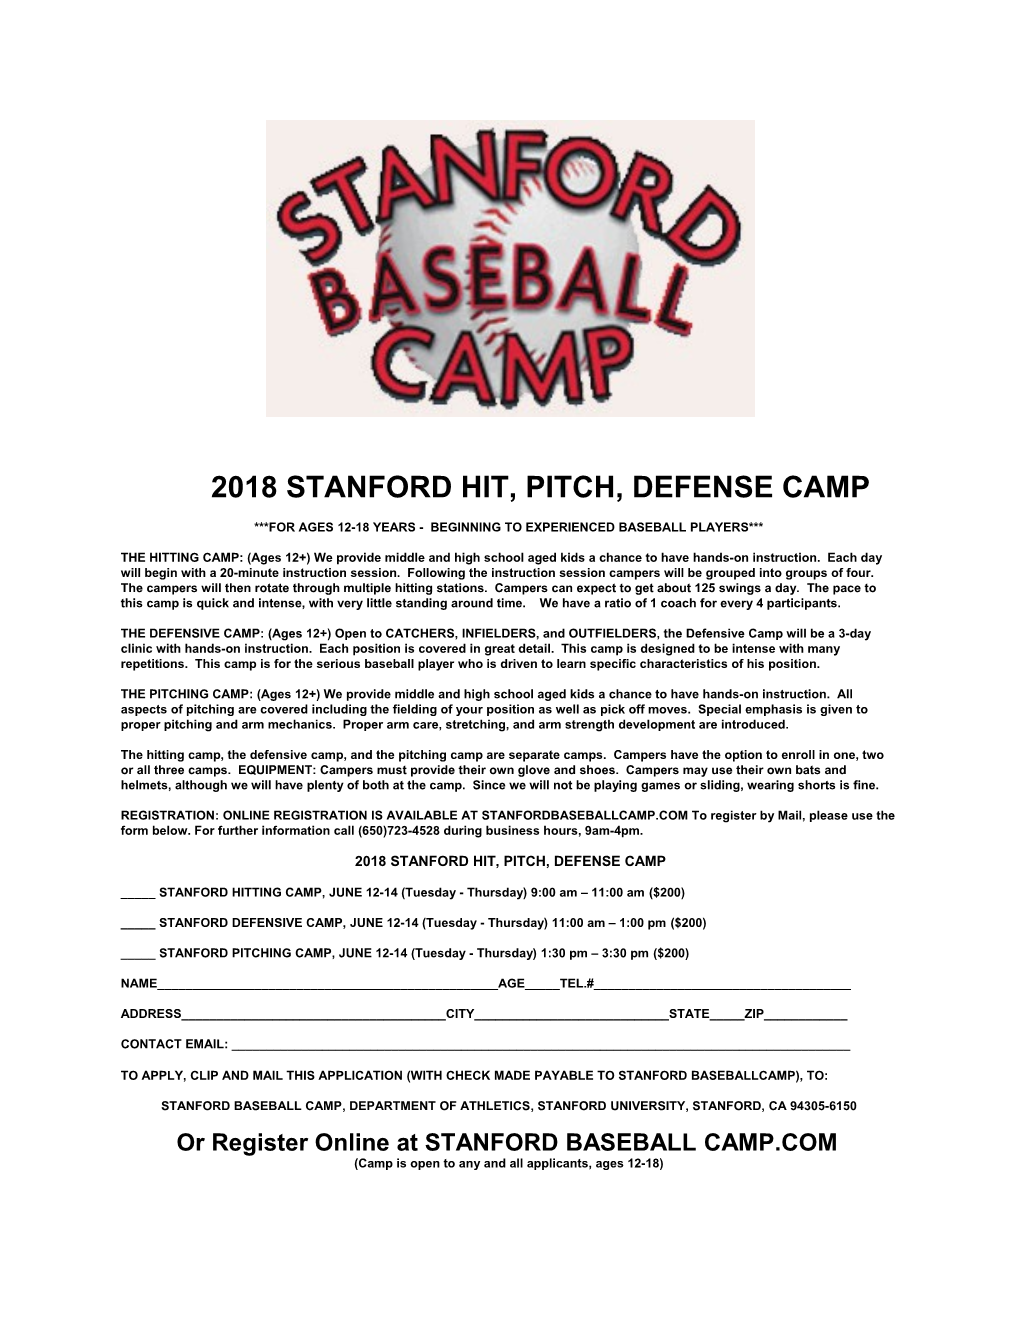 2018 Stanford Hit, Pitch, Defense Camp